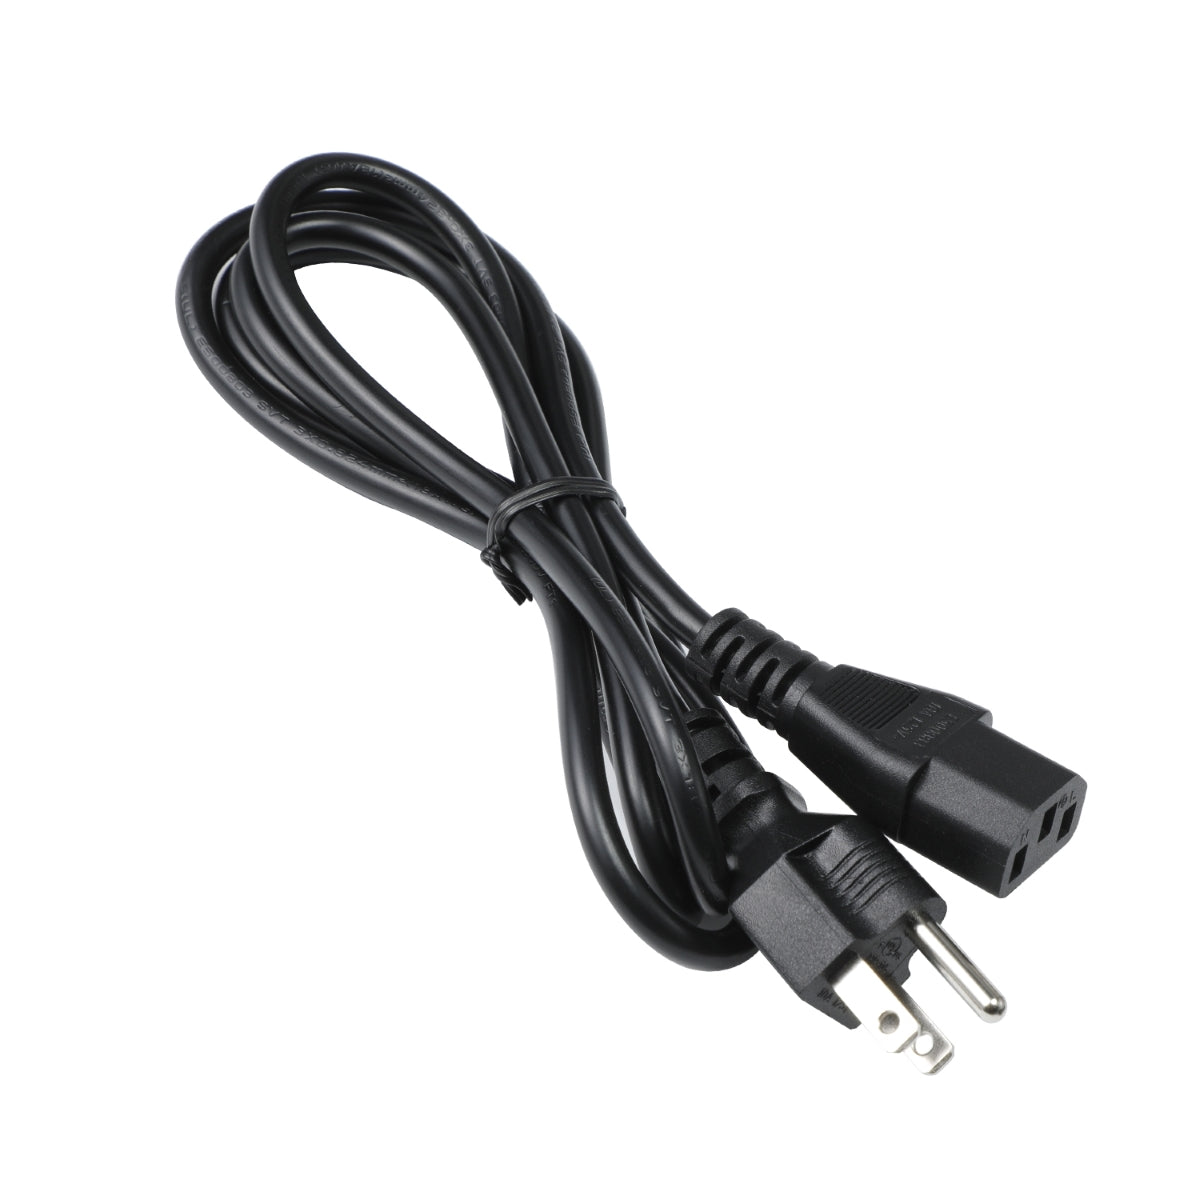 Power Cord for Acer HA230 Monitor.